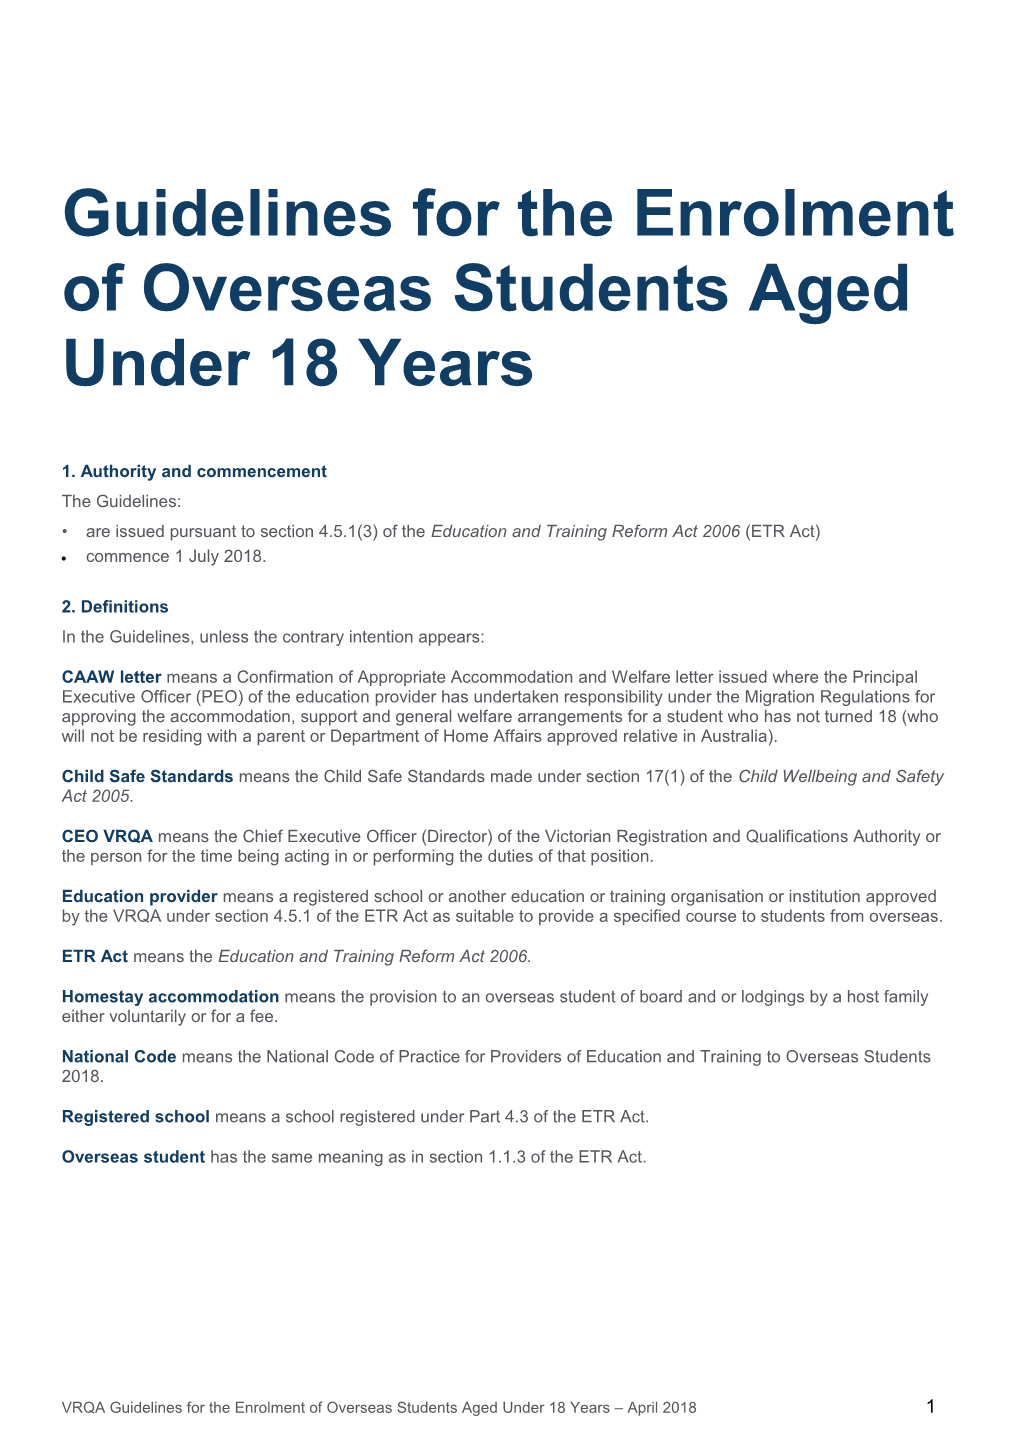 Guidelines for the Enrolment of Overseas Students Aged Under 18 Years